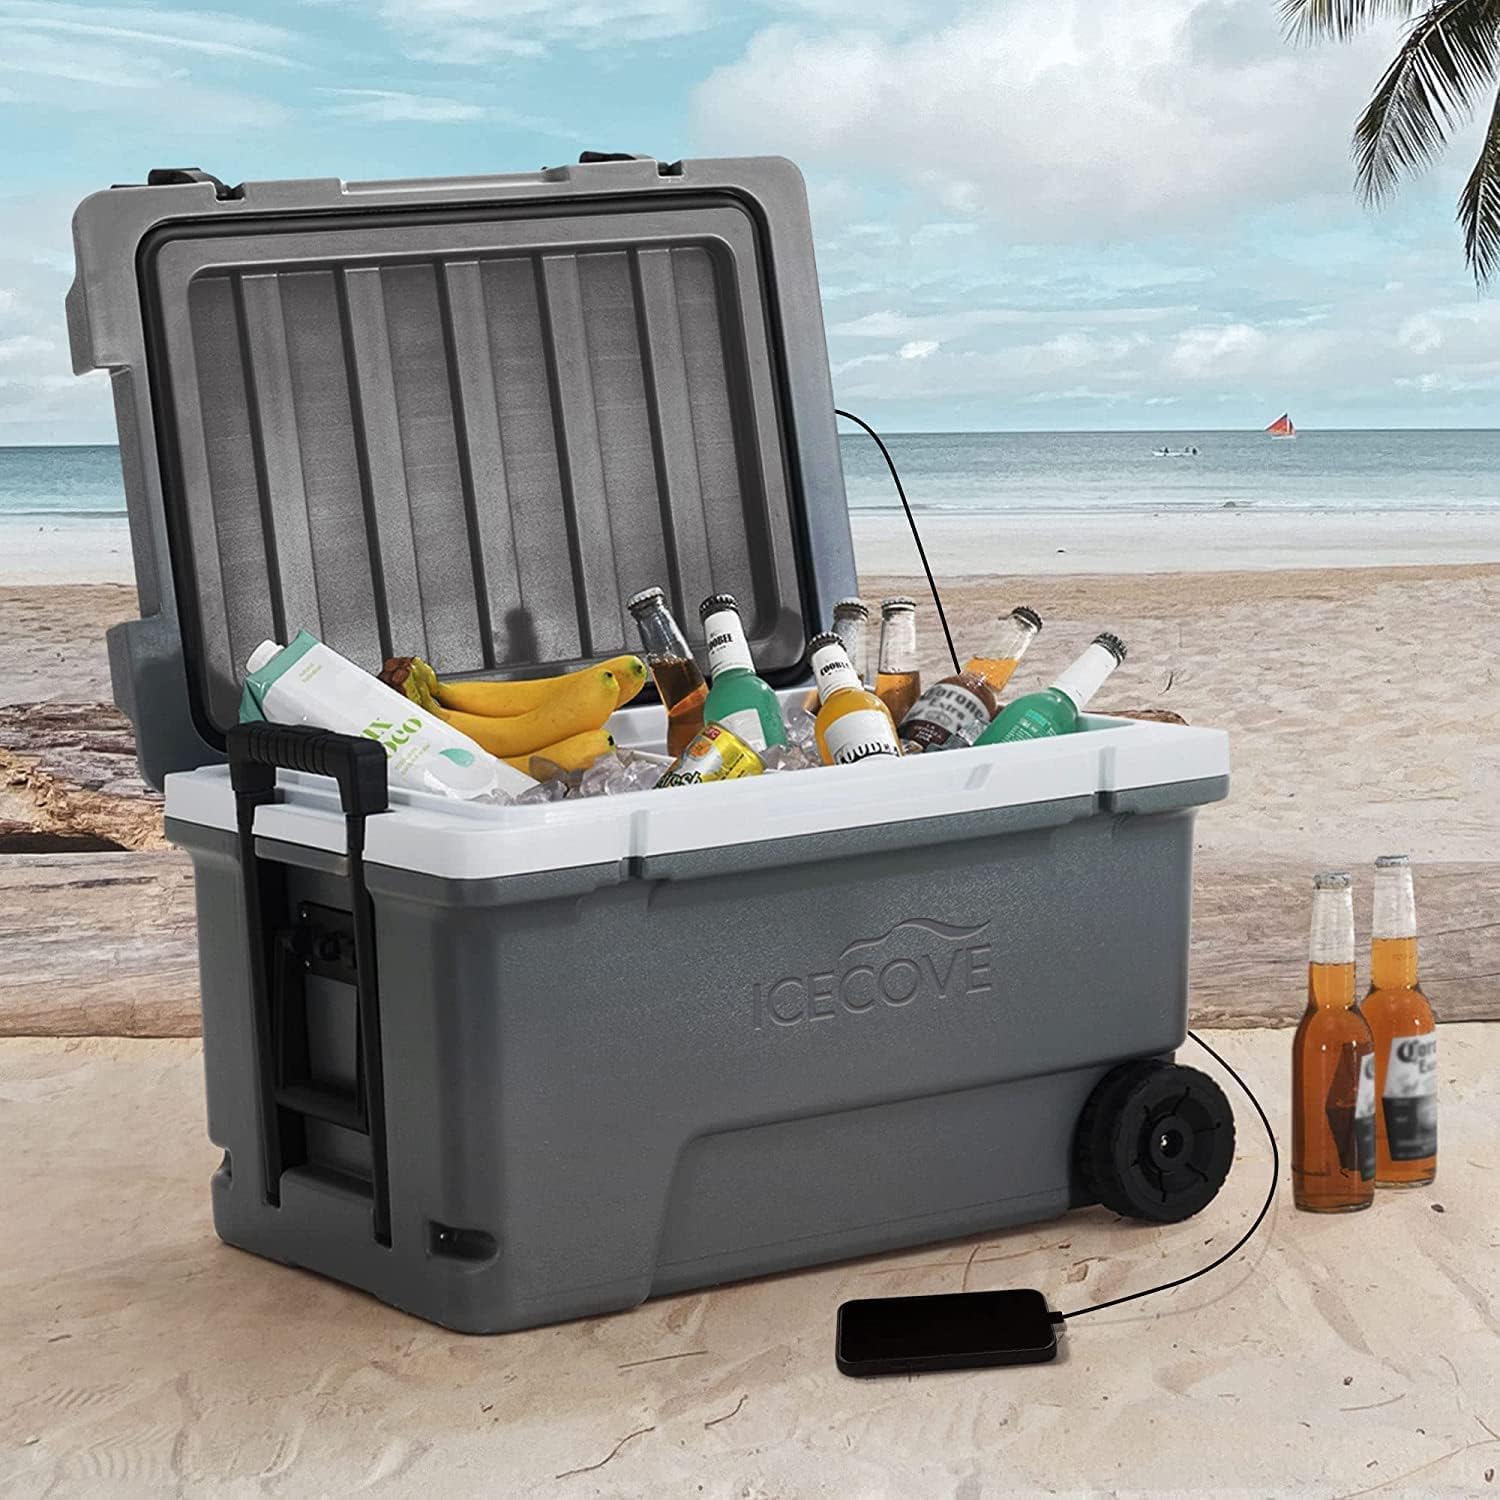 Icecove Ice Cooler For Camping